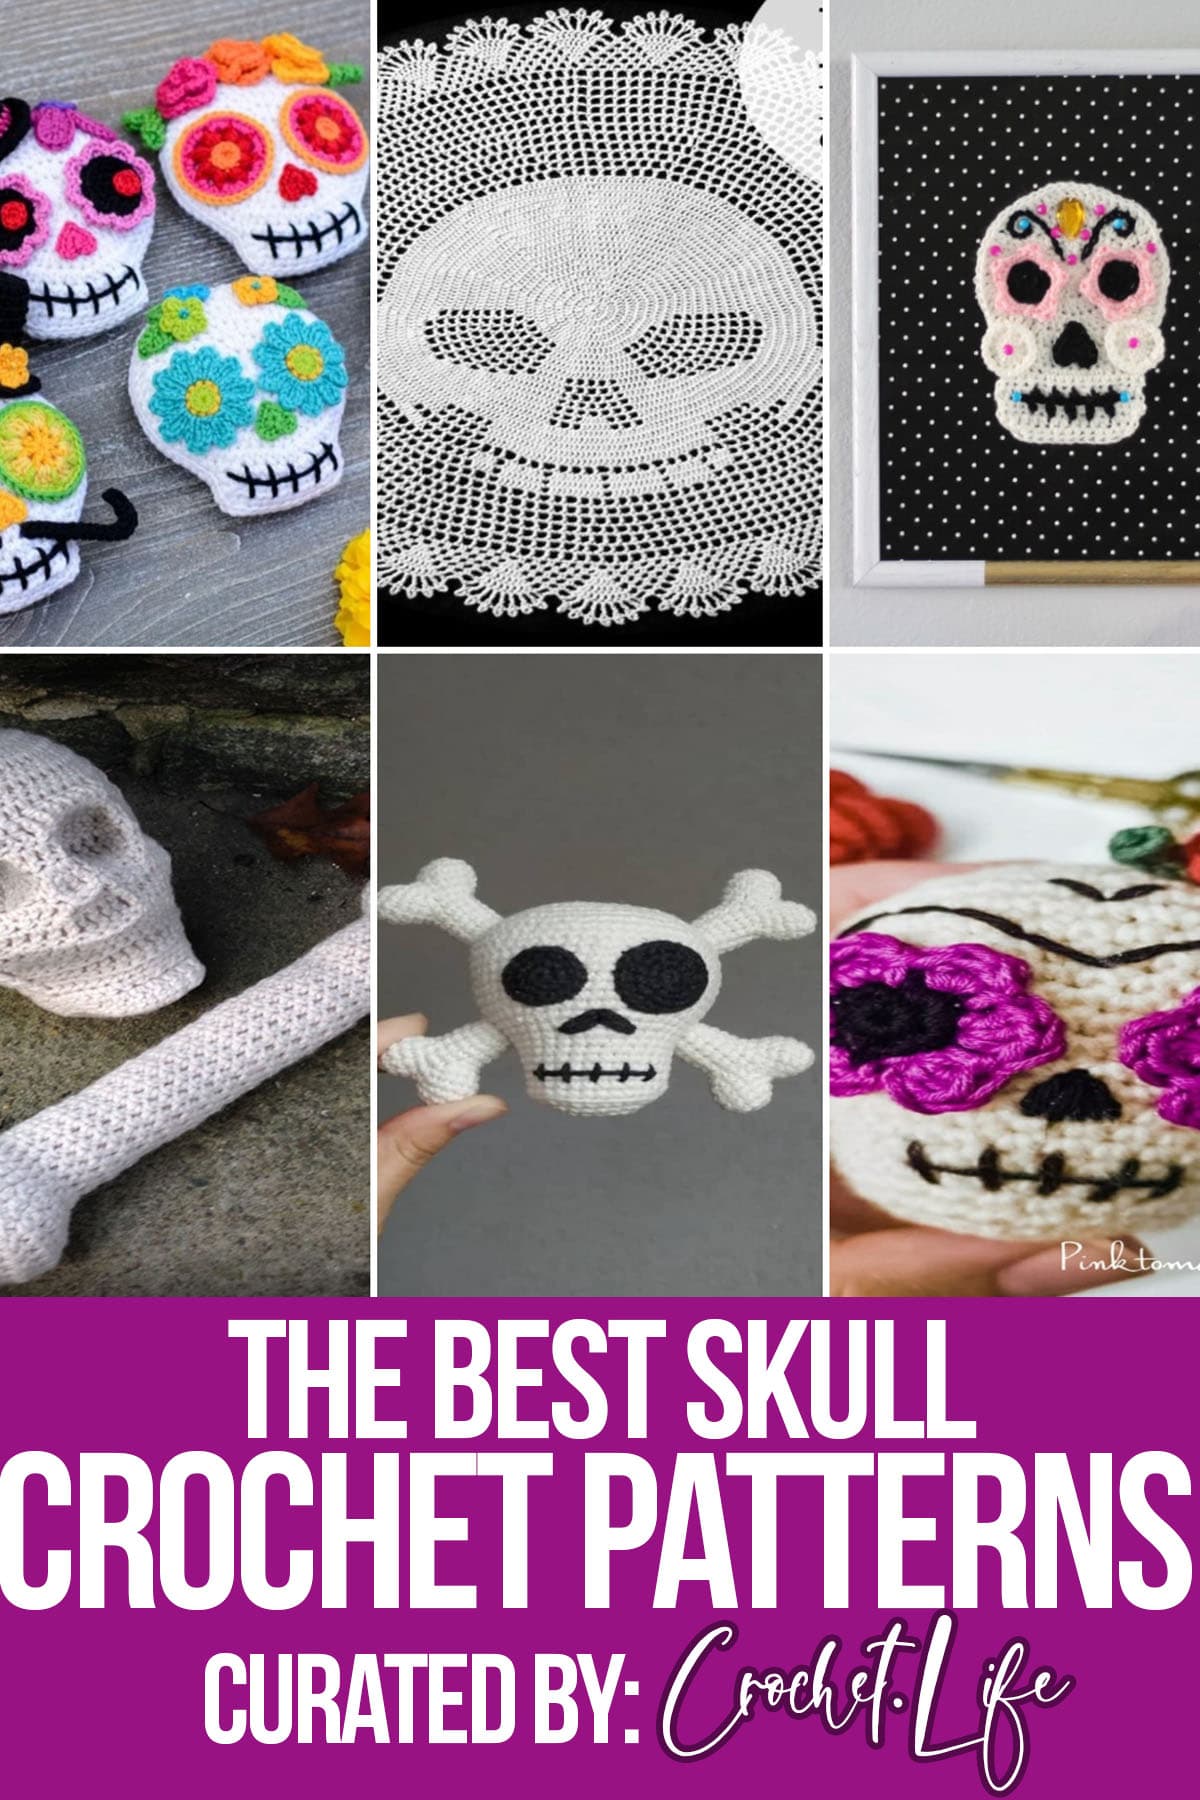 photo collage of crochet patterns for skulls with text which reads the best skull crochet patterns curated by crochet.life